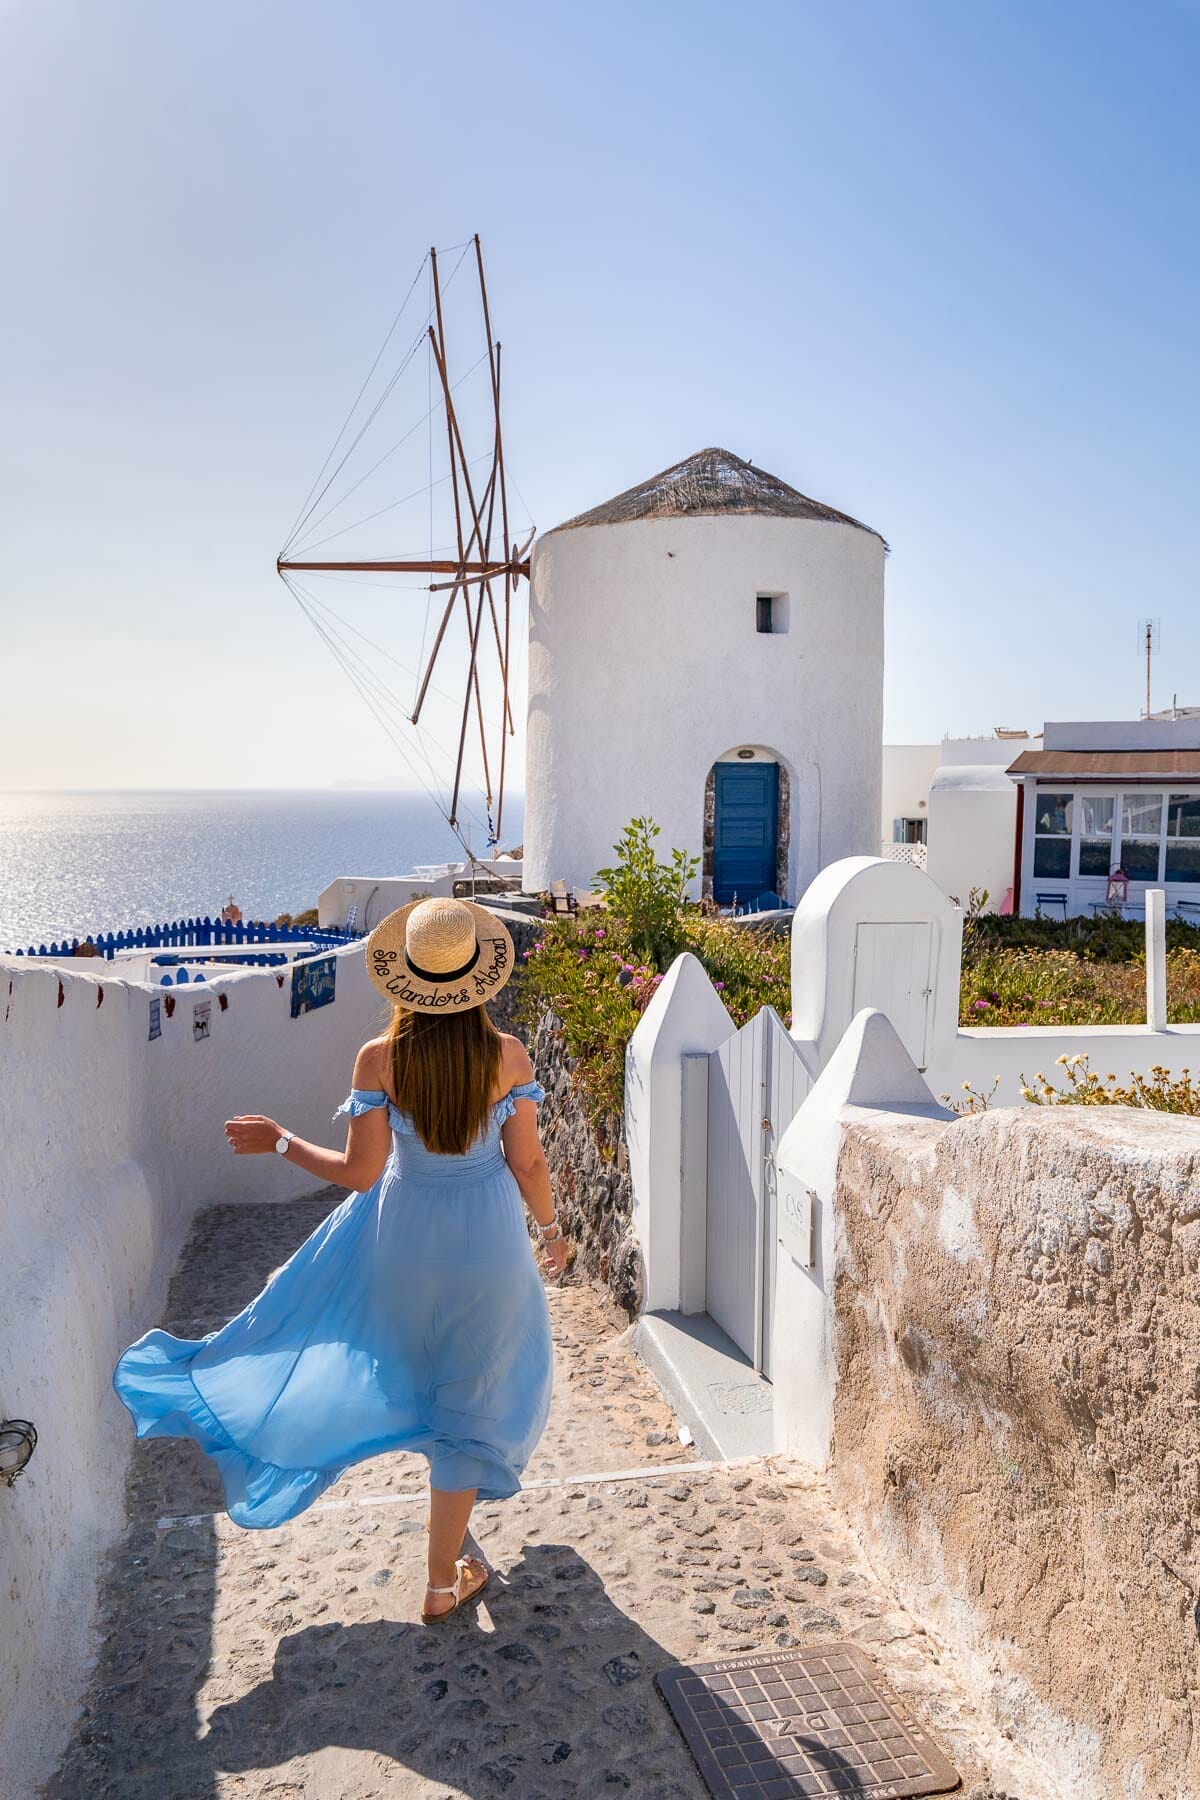 Girl in front of a windmill in Oia, Santorini